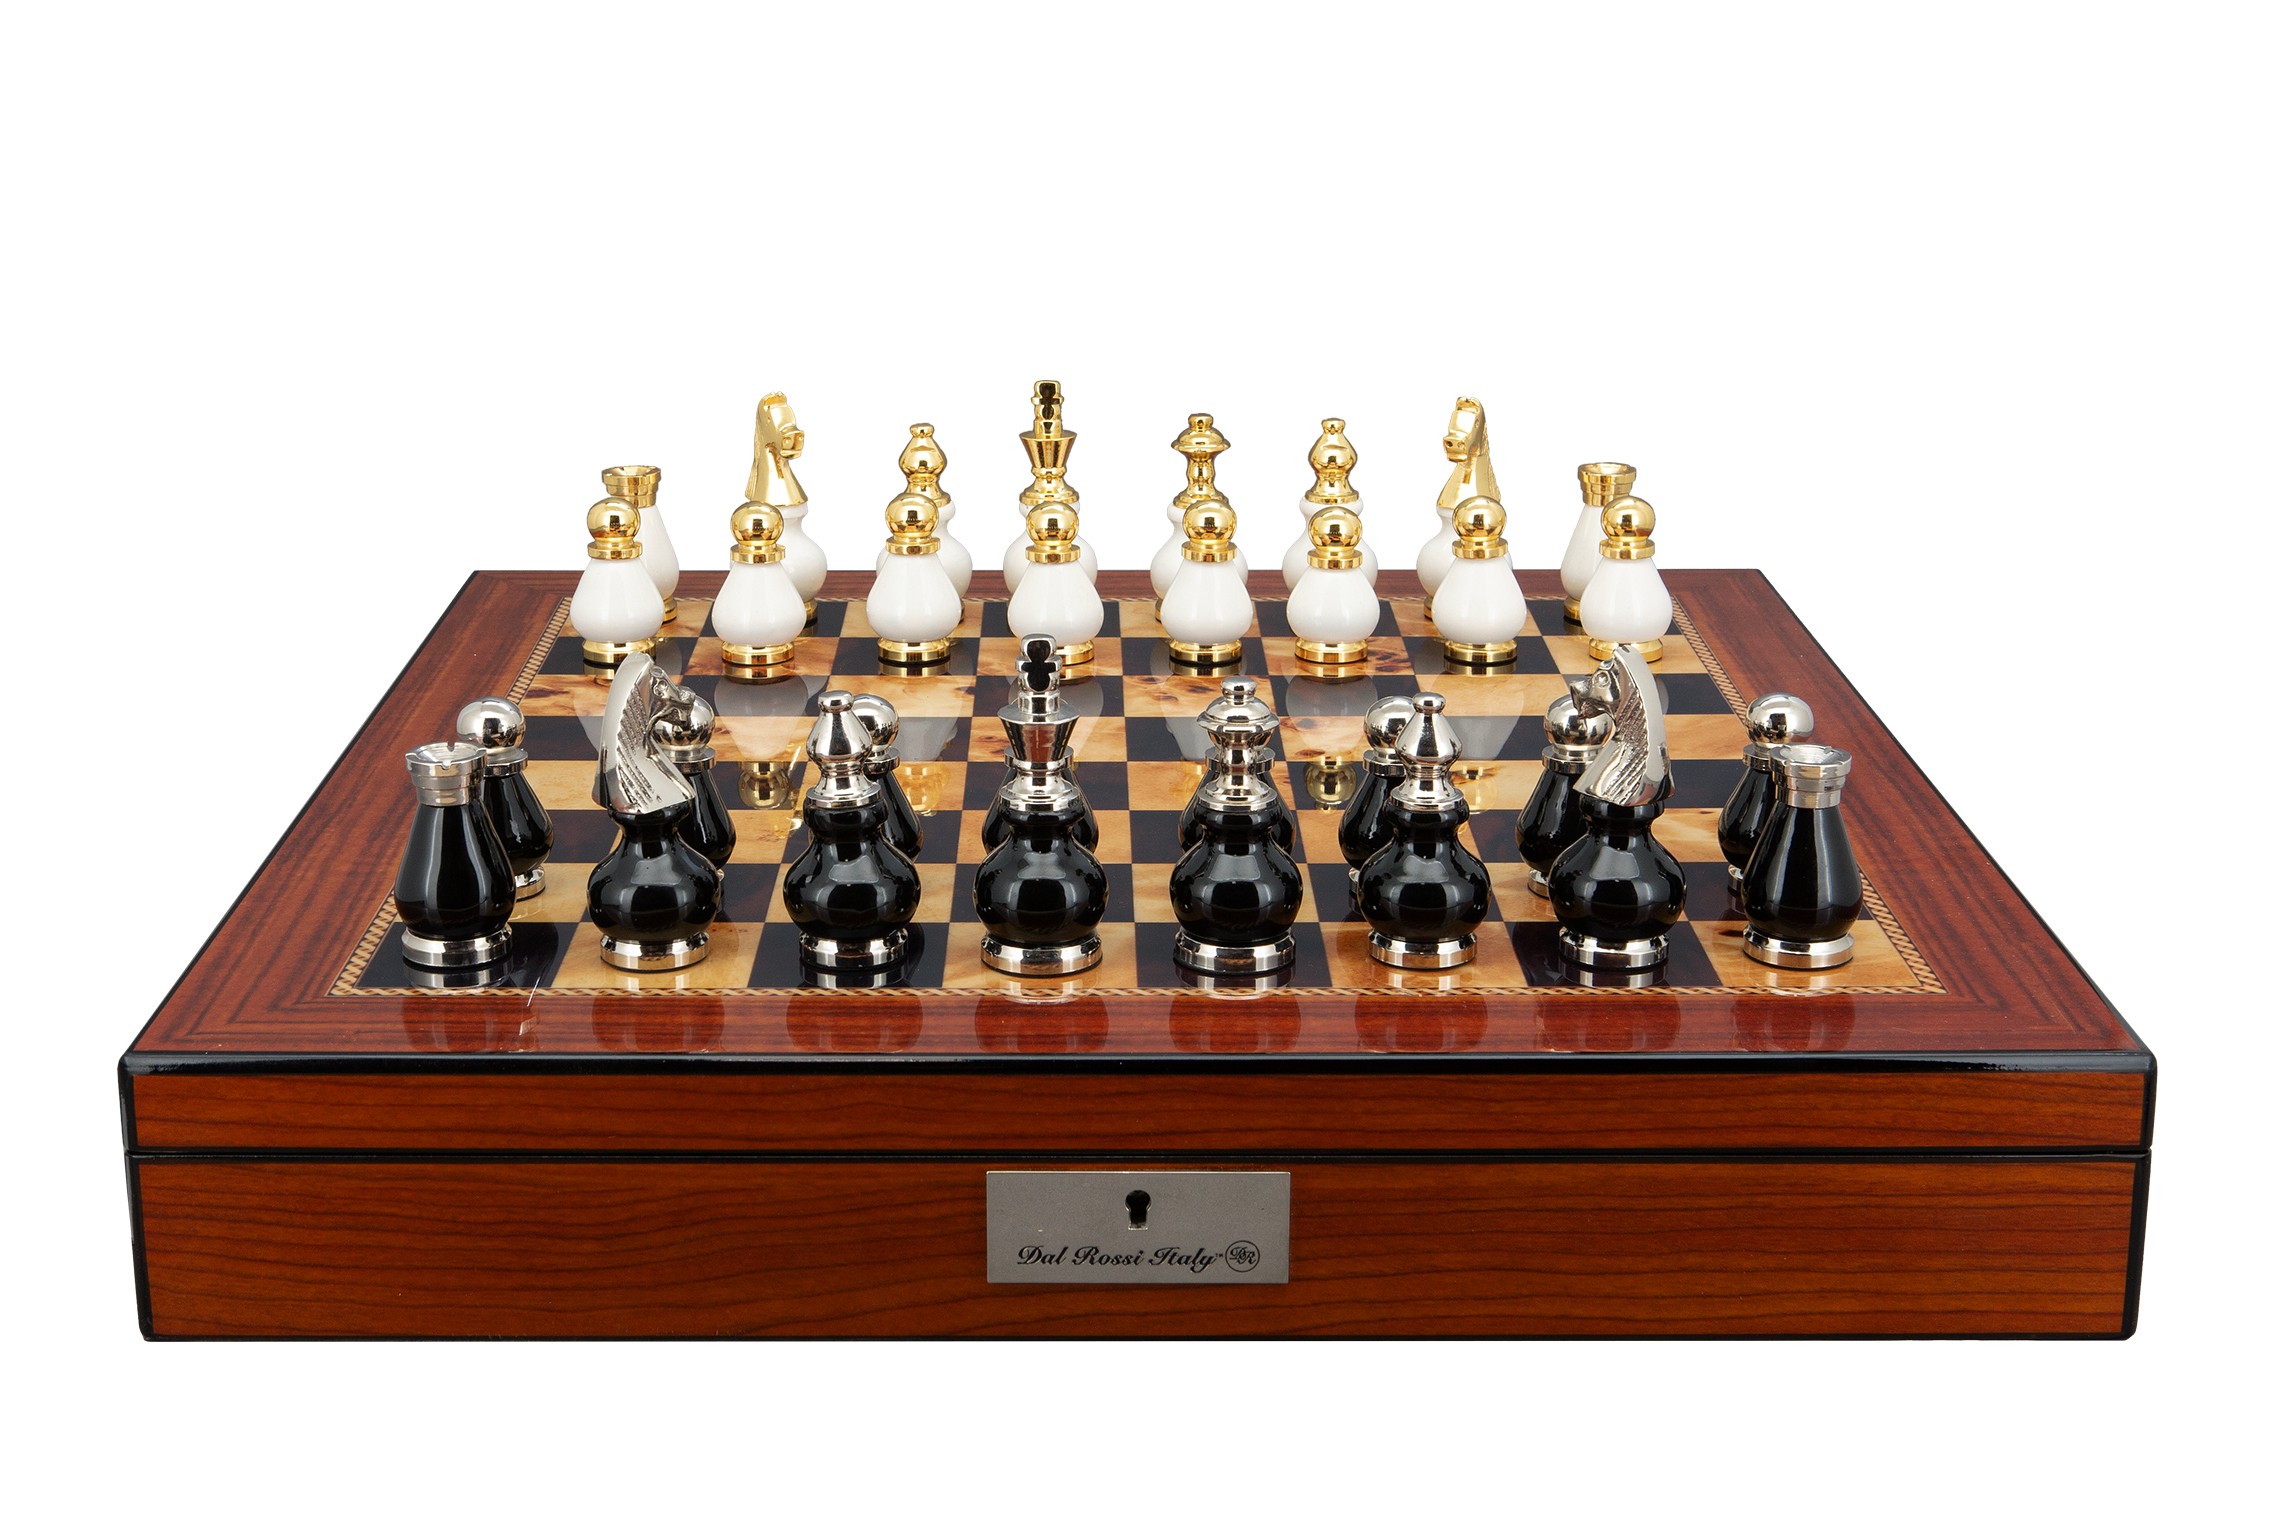 Dal Rossi Italy, Black and White with Gold and Silver Tops and Bottoms Chessmen 90mm on a Walnut Finish Shiny Chess Box with Compartments 20"